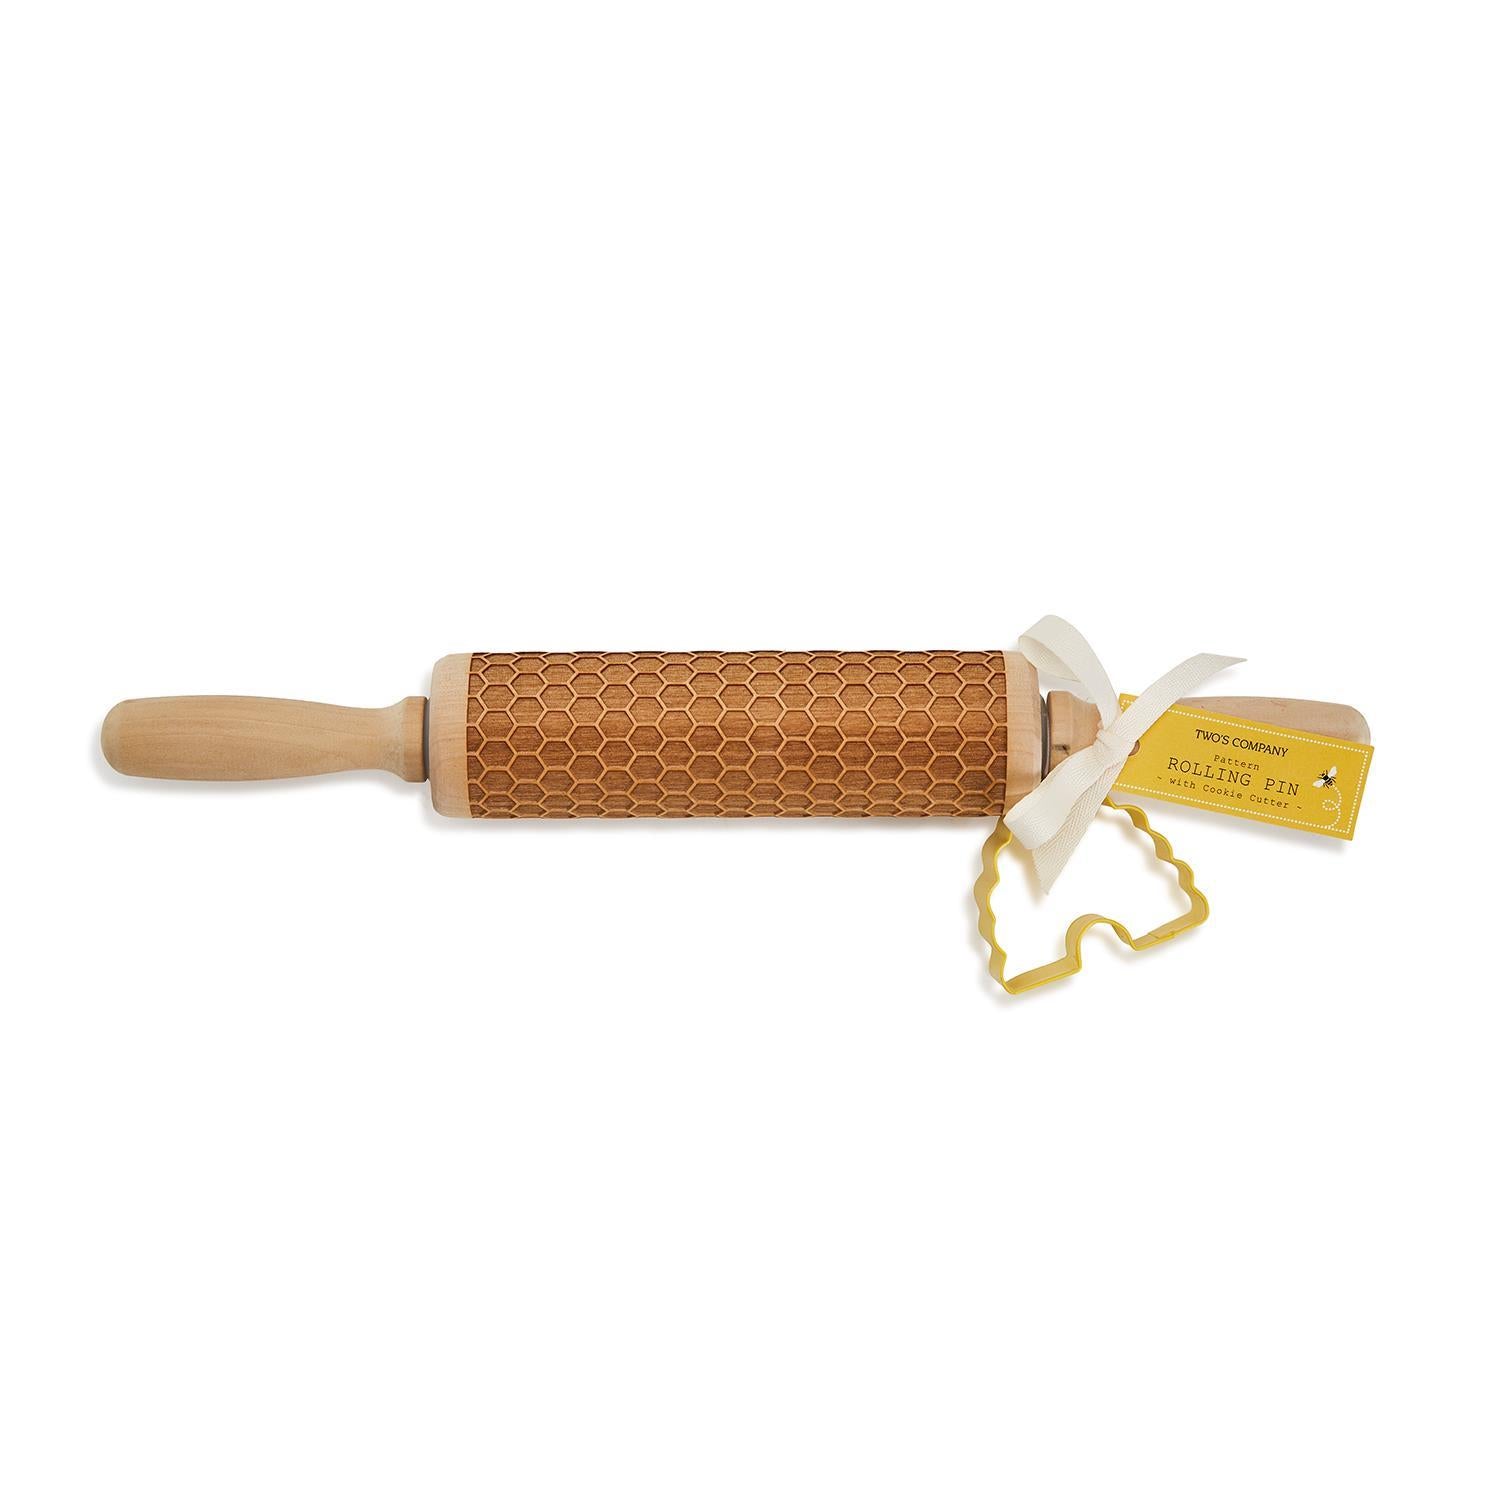 Honeycomb Rolling Pin w/ Bee Hive Cookie Cutter